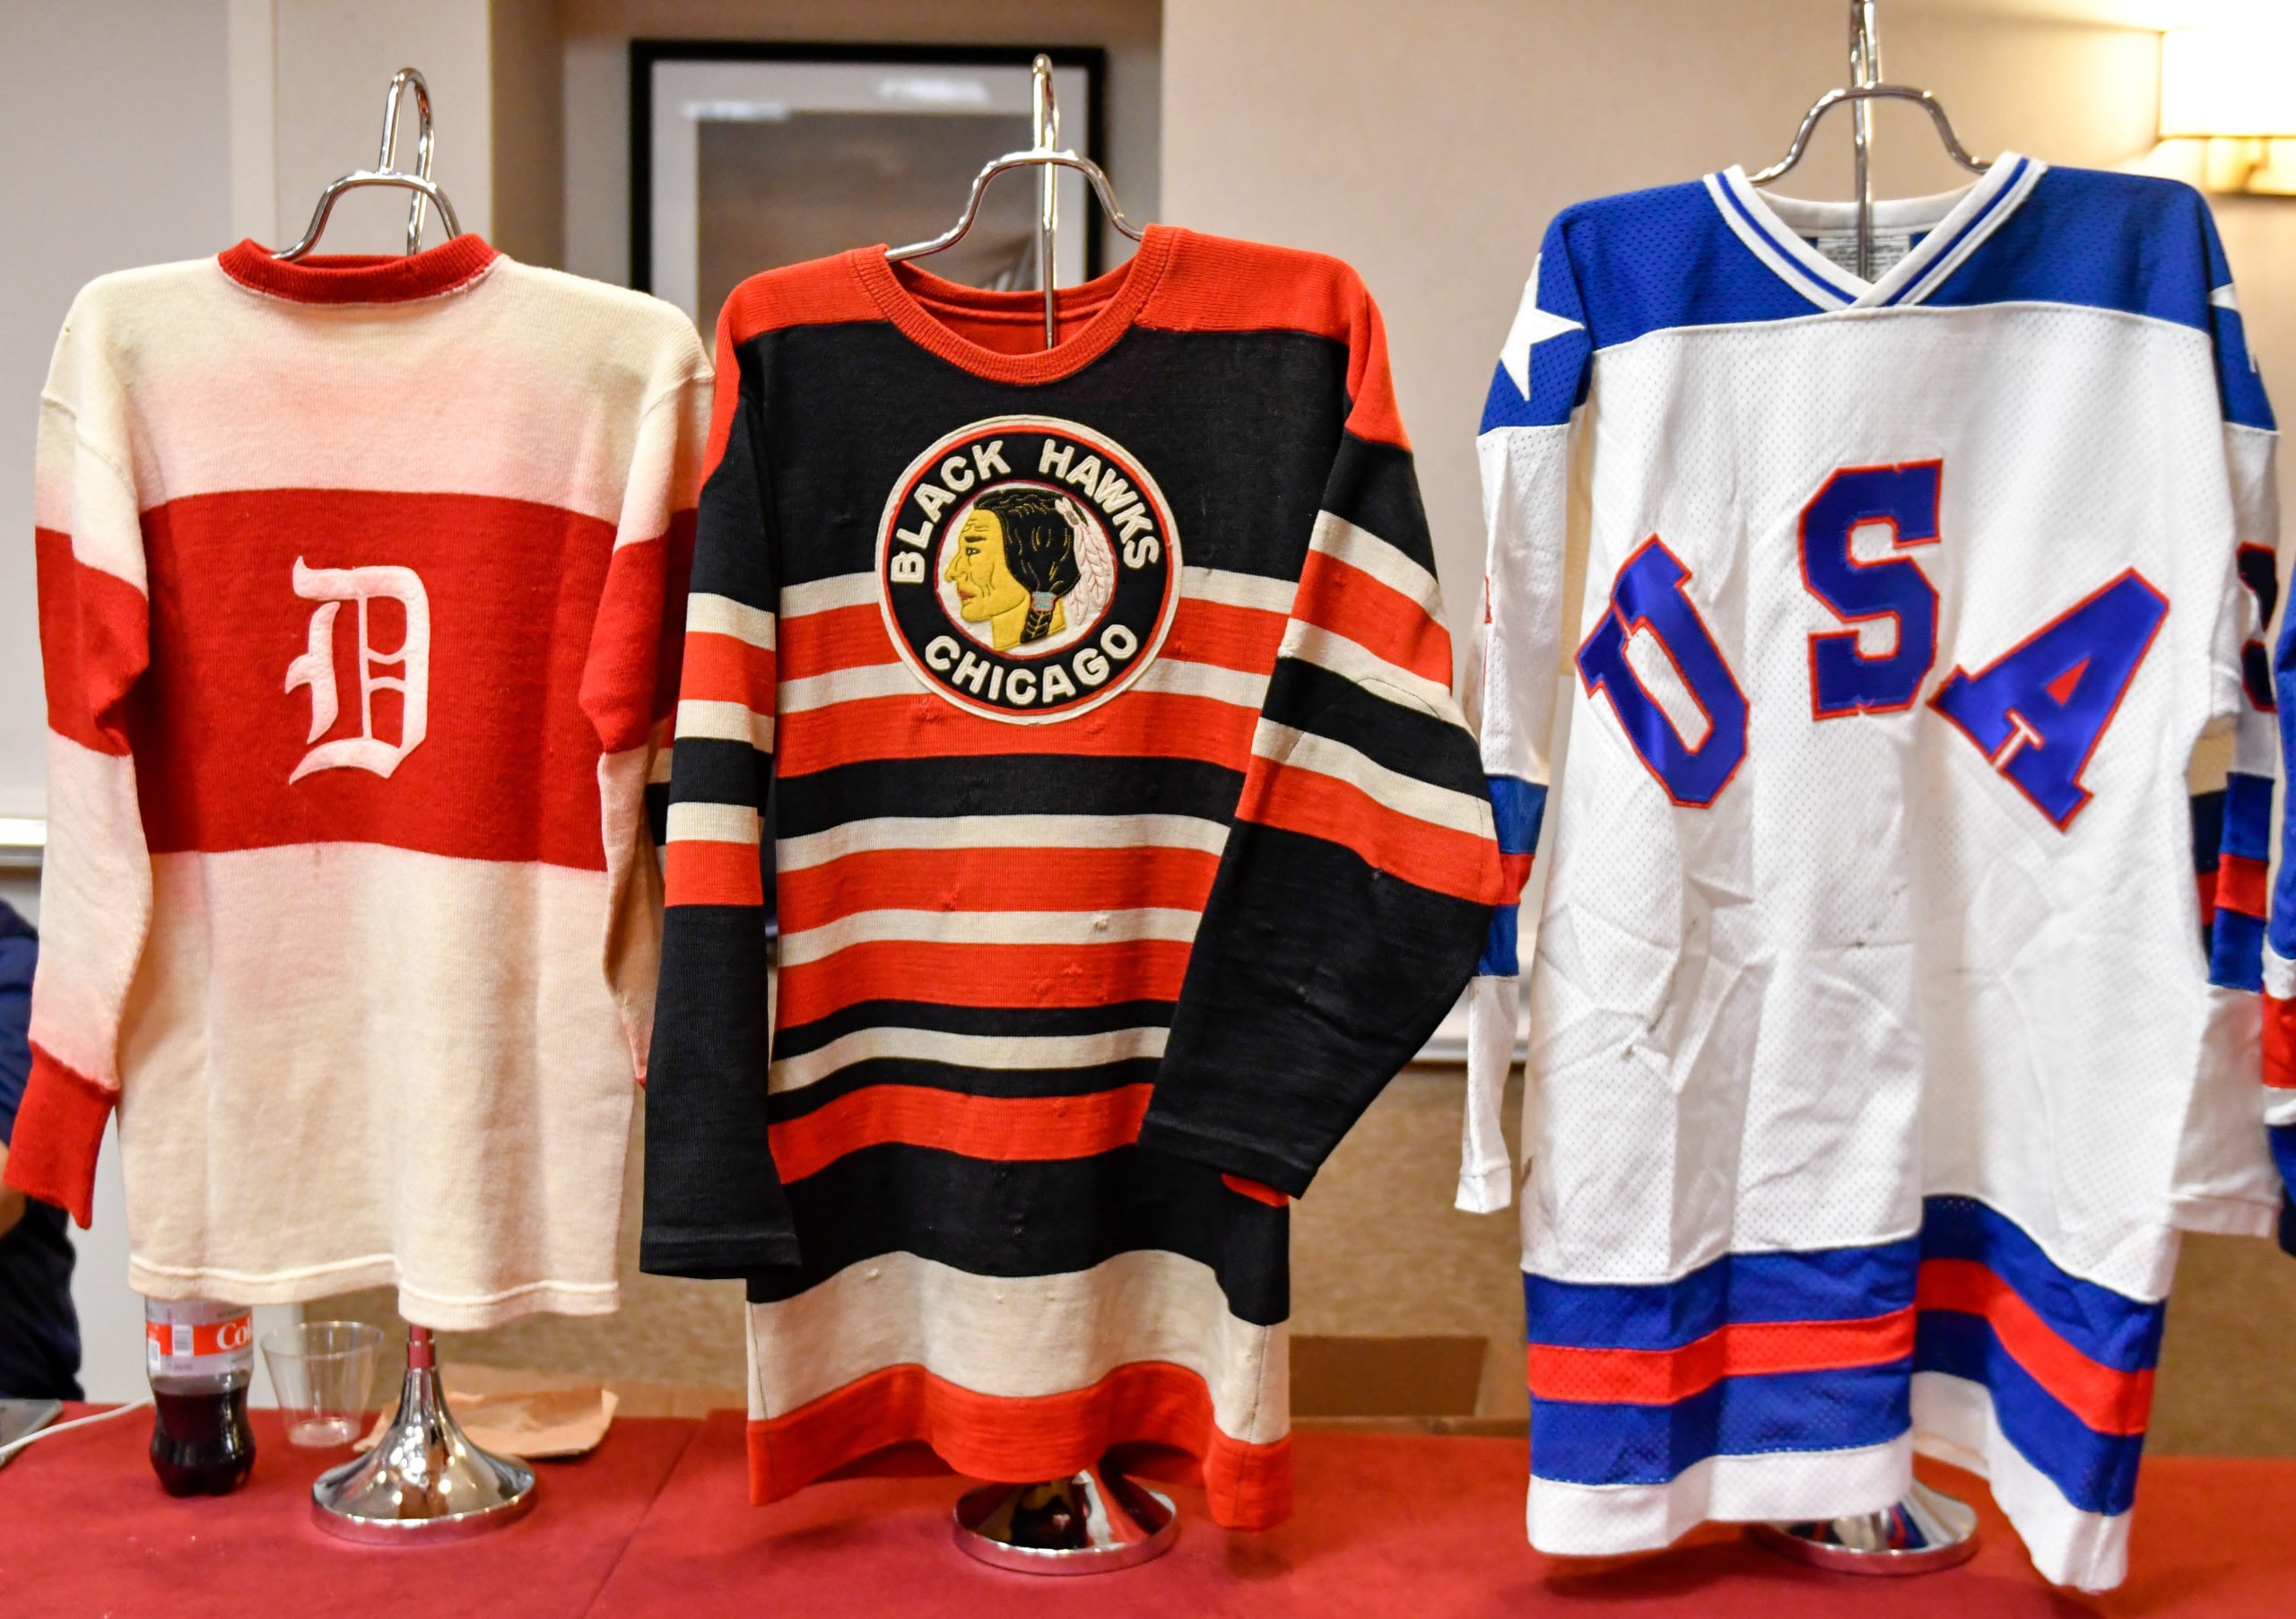 Scenes From The 13th Annual NoVa Game-Worn Jersey Expo